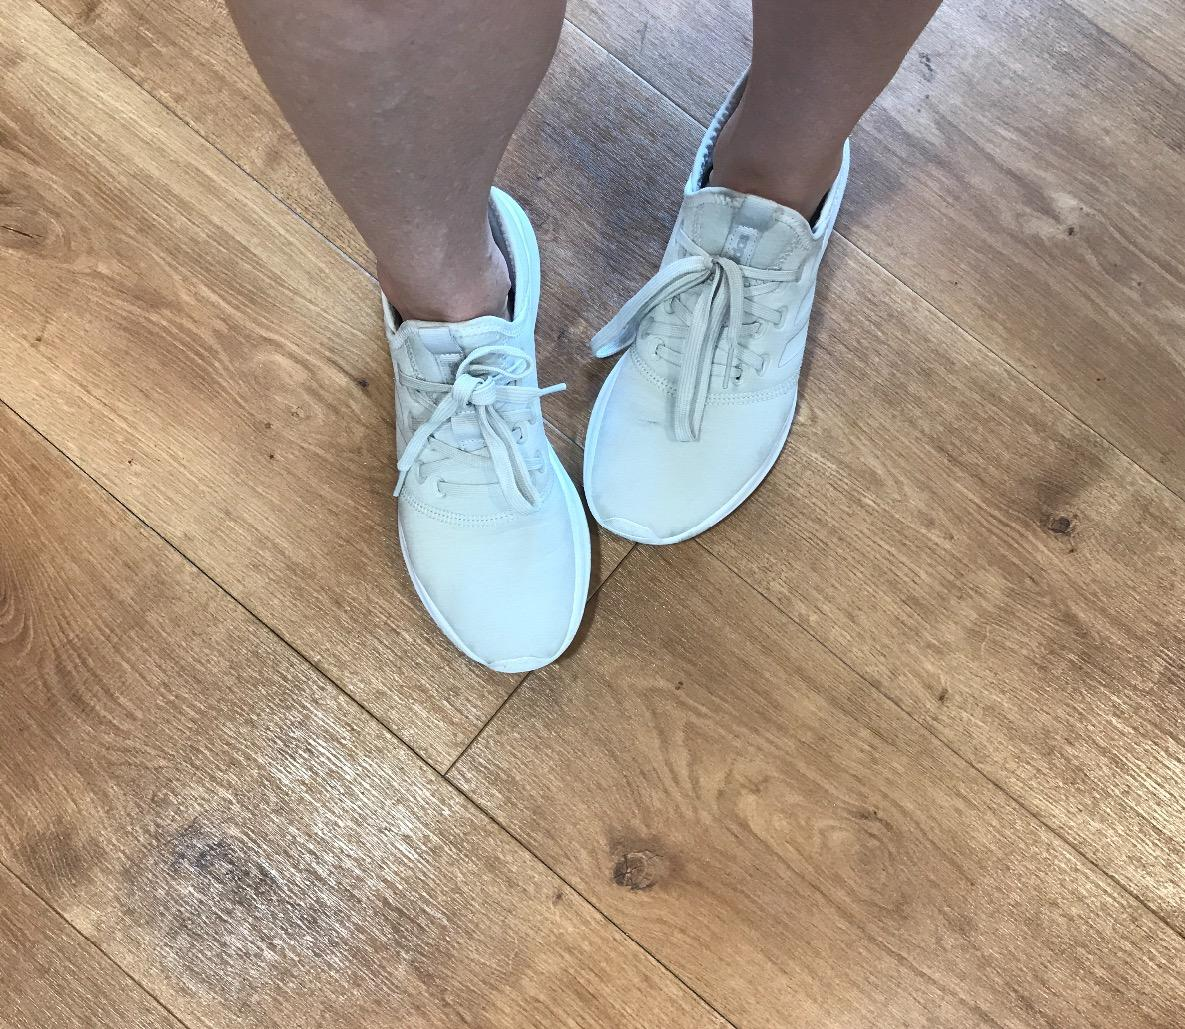 Nude Girls Only Wearing Running Shoes